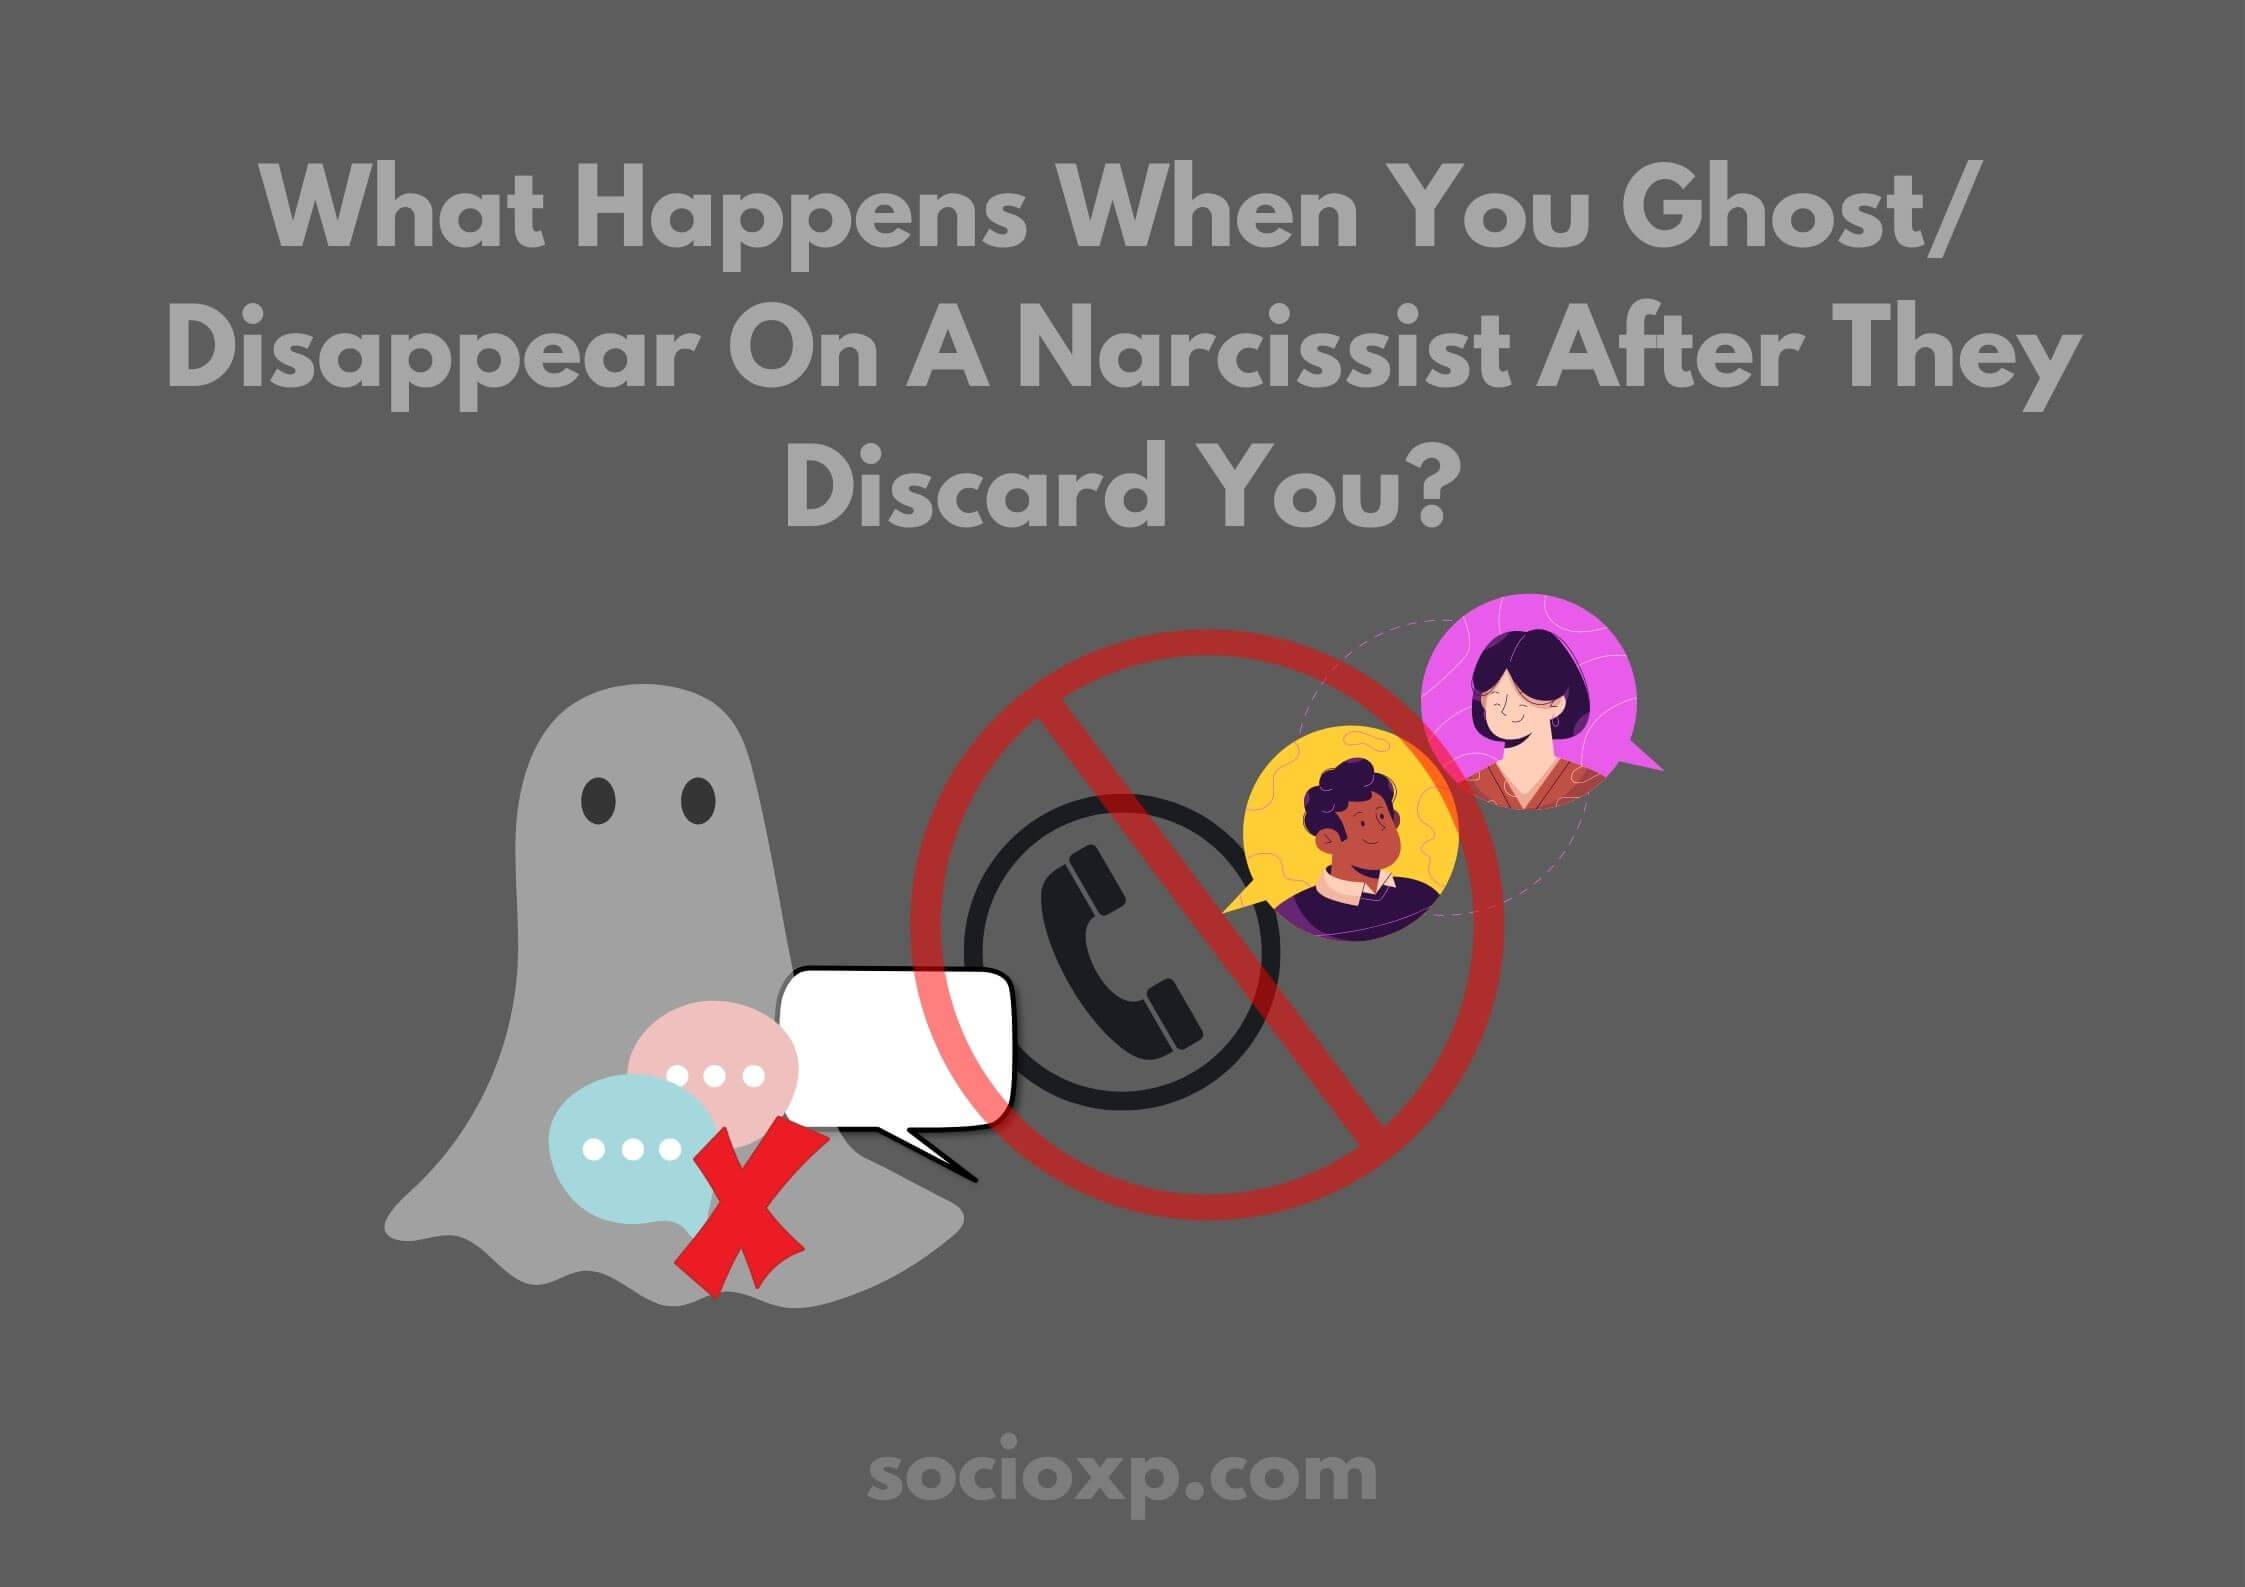 What Happens When You Ghost/ Disappear On A Narcissist After They Discard You?